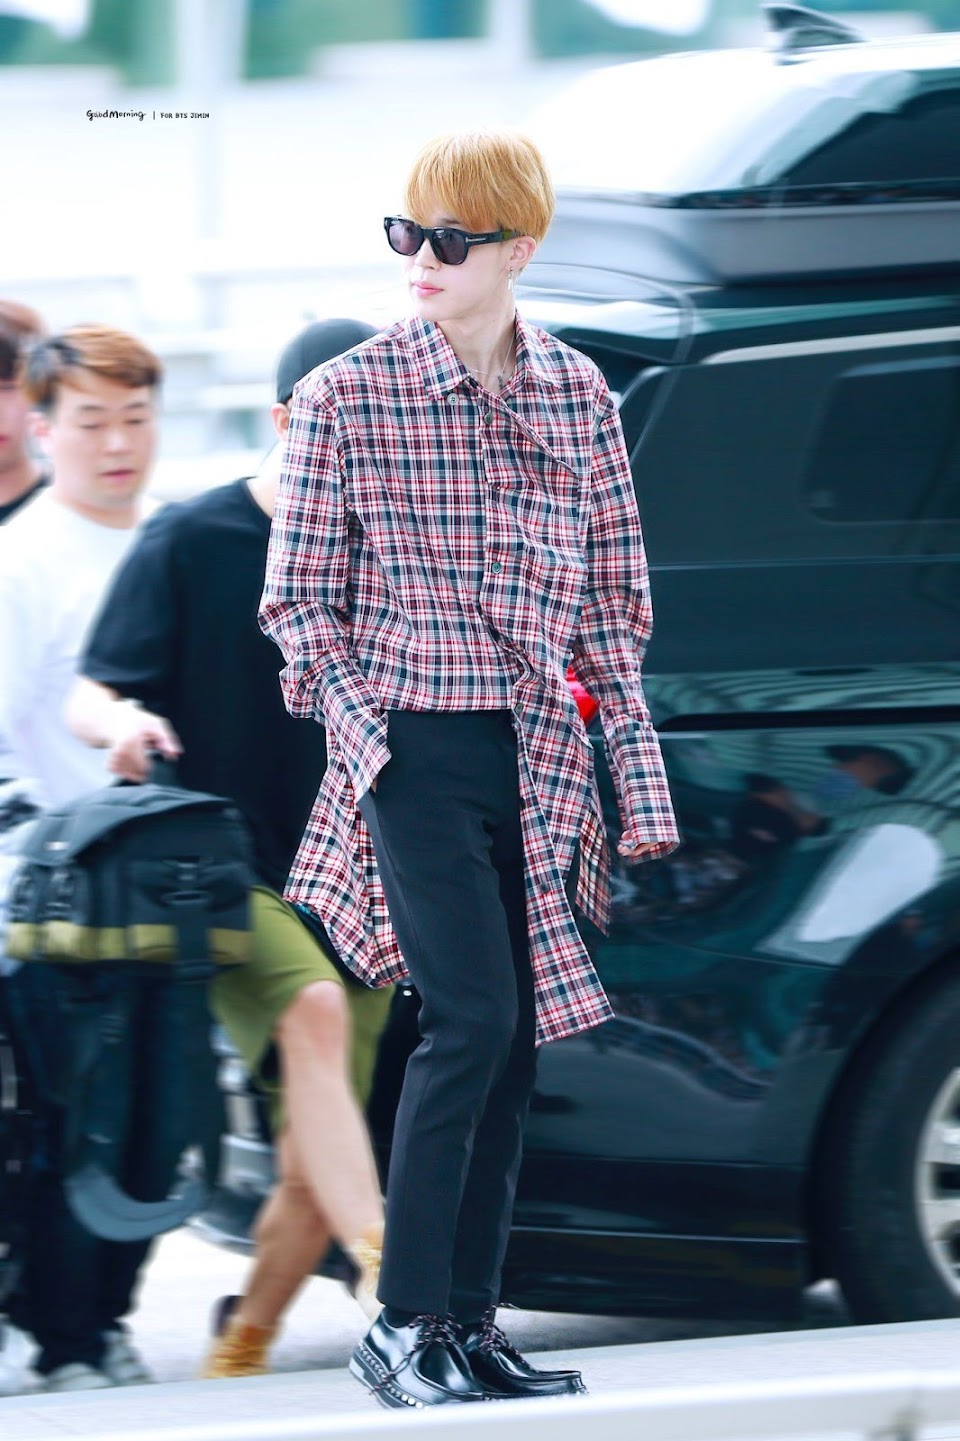 BTS Jimin's elegant airport fashion is highlighted by Japanese